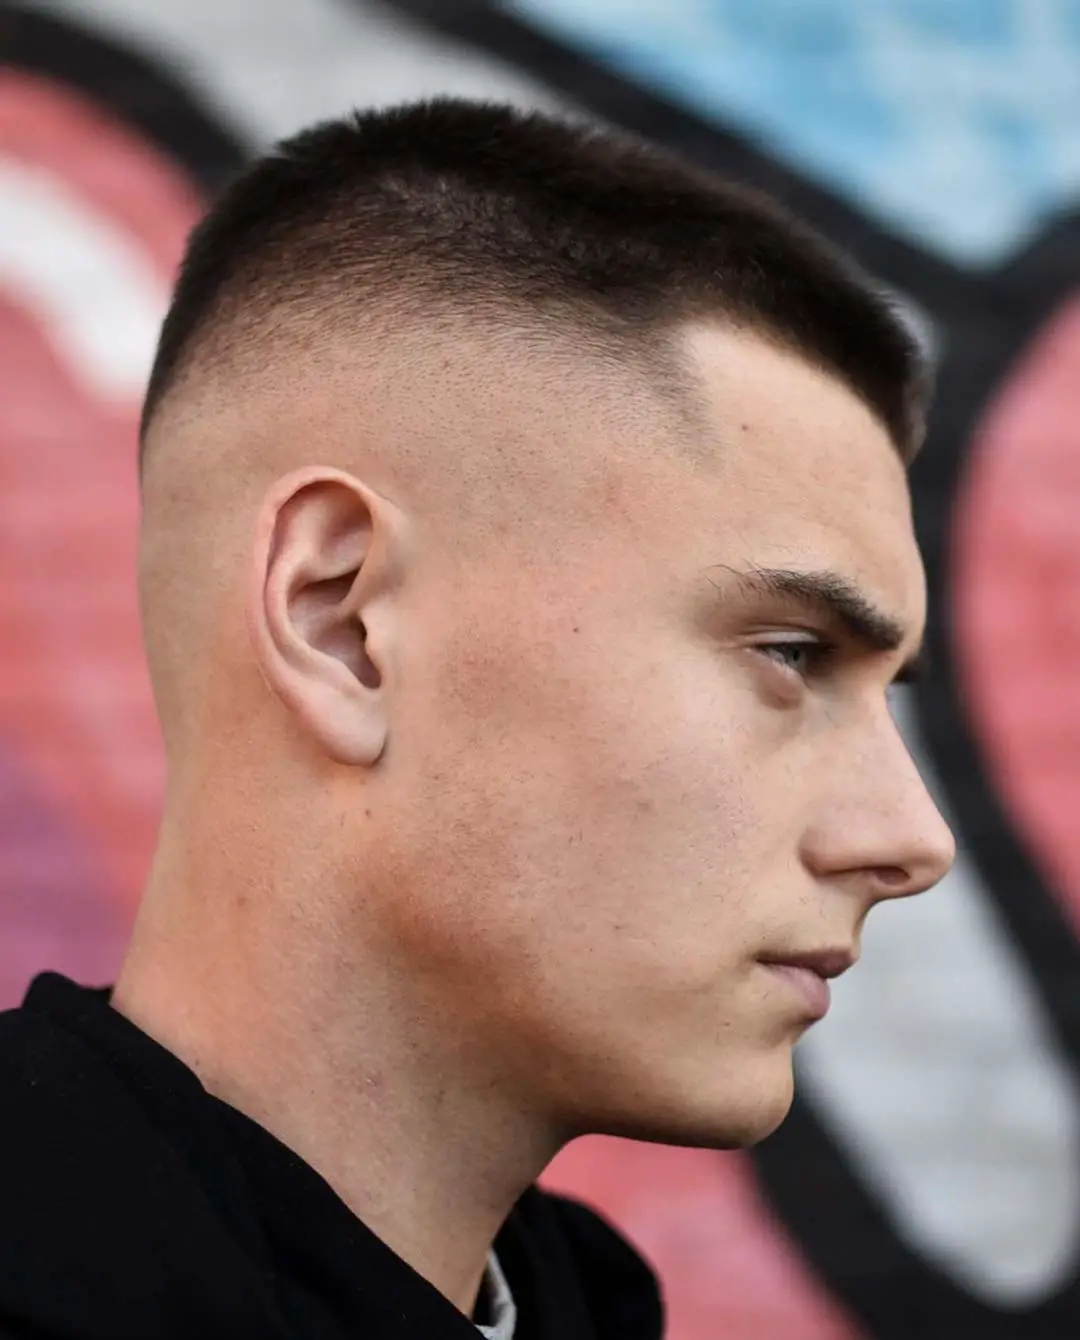 16 Trendy Military Haircut Ideas for Men [2023 Style Guide]